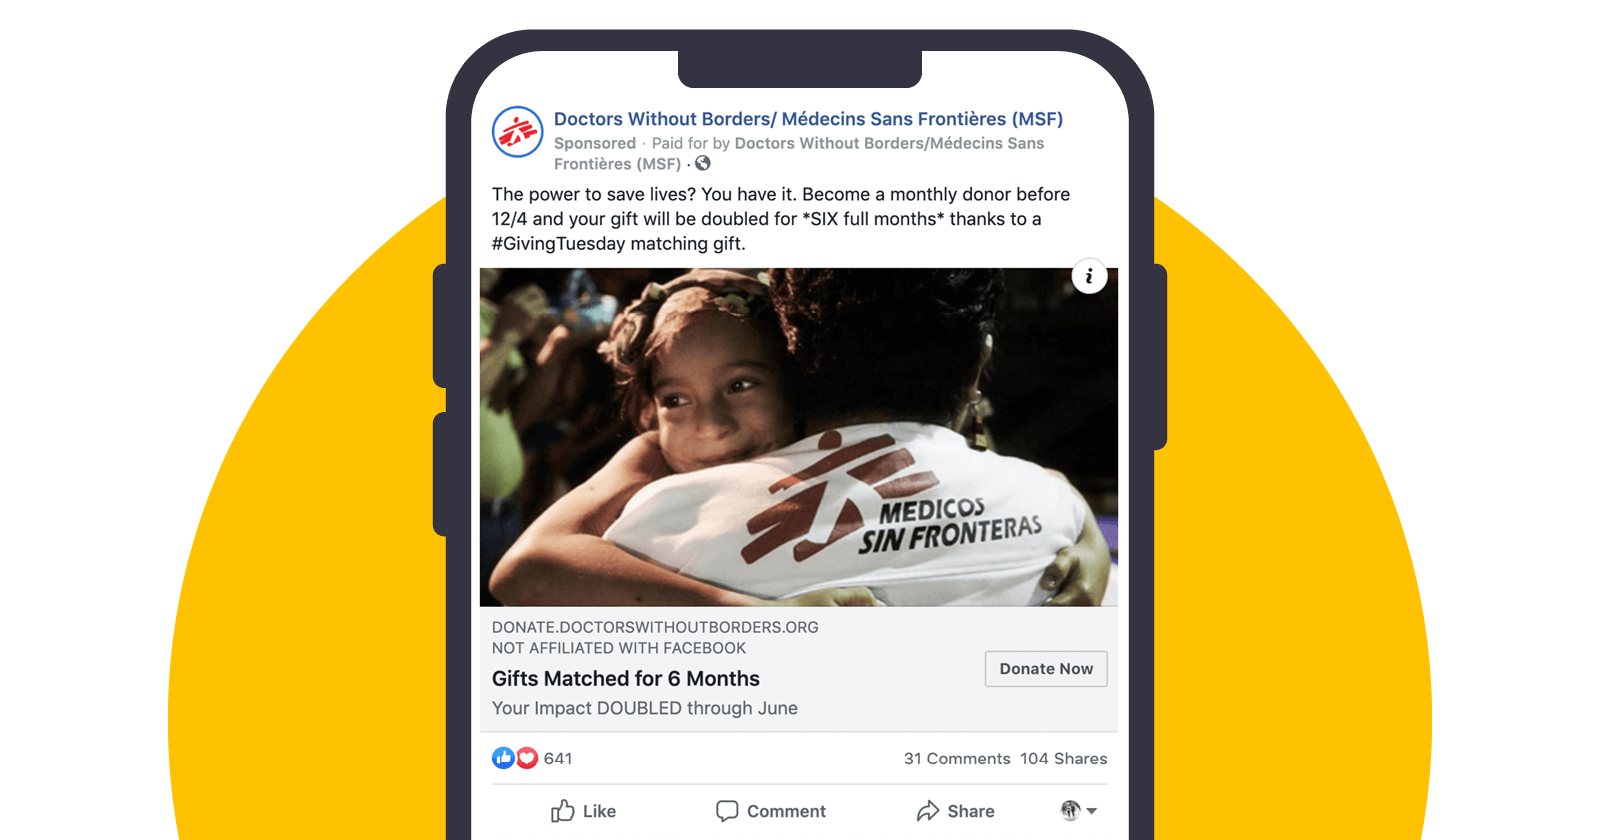 An example of a Facebook Ad campaign that Doctors Without Borders launched for GivingTuesday